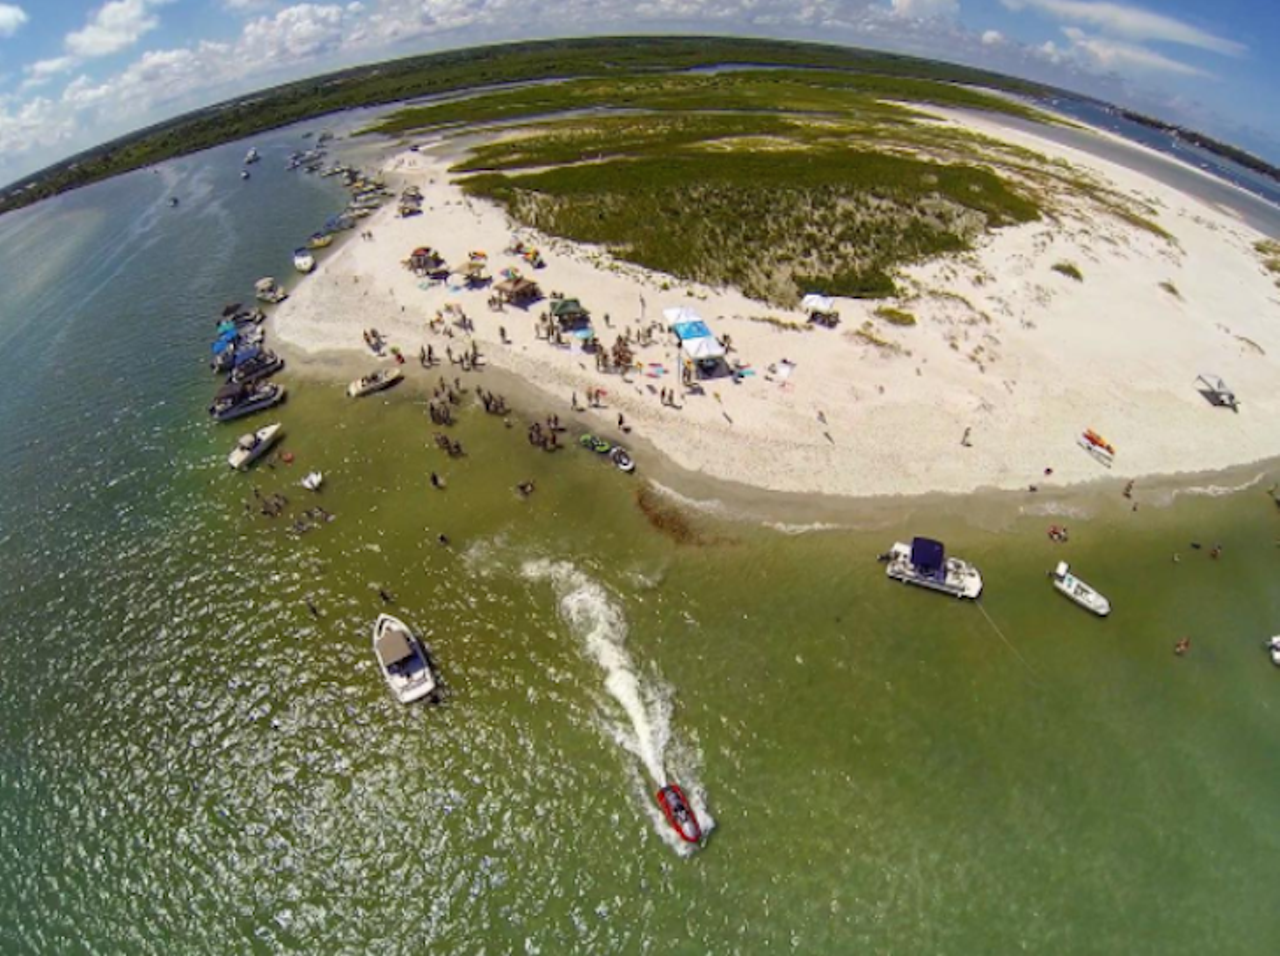 Disappearing Island
Ponce Inlet
Disappearing Island is like walking onto the set of a hip-hop music video: boats, booze and bangin' tunes in every direction. Enjoy the warm water while you can ... low tide only lasts so long and then there goes the island.
Photo via chriskernstock/Instagram